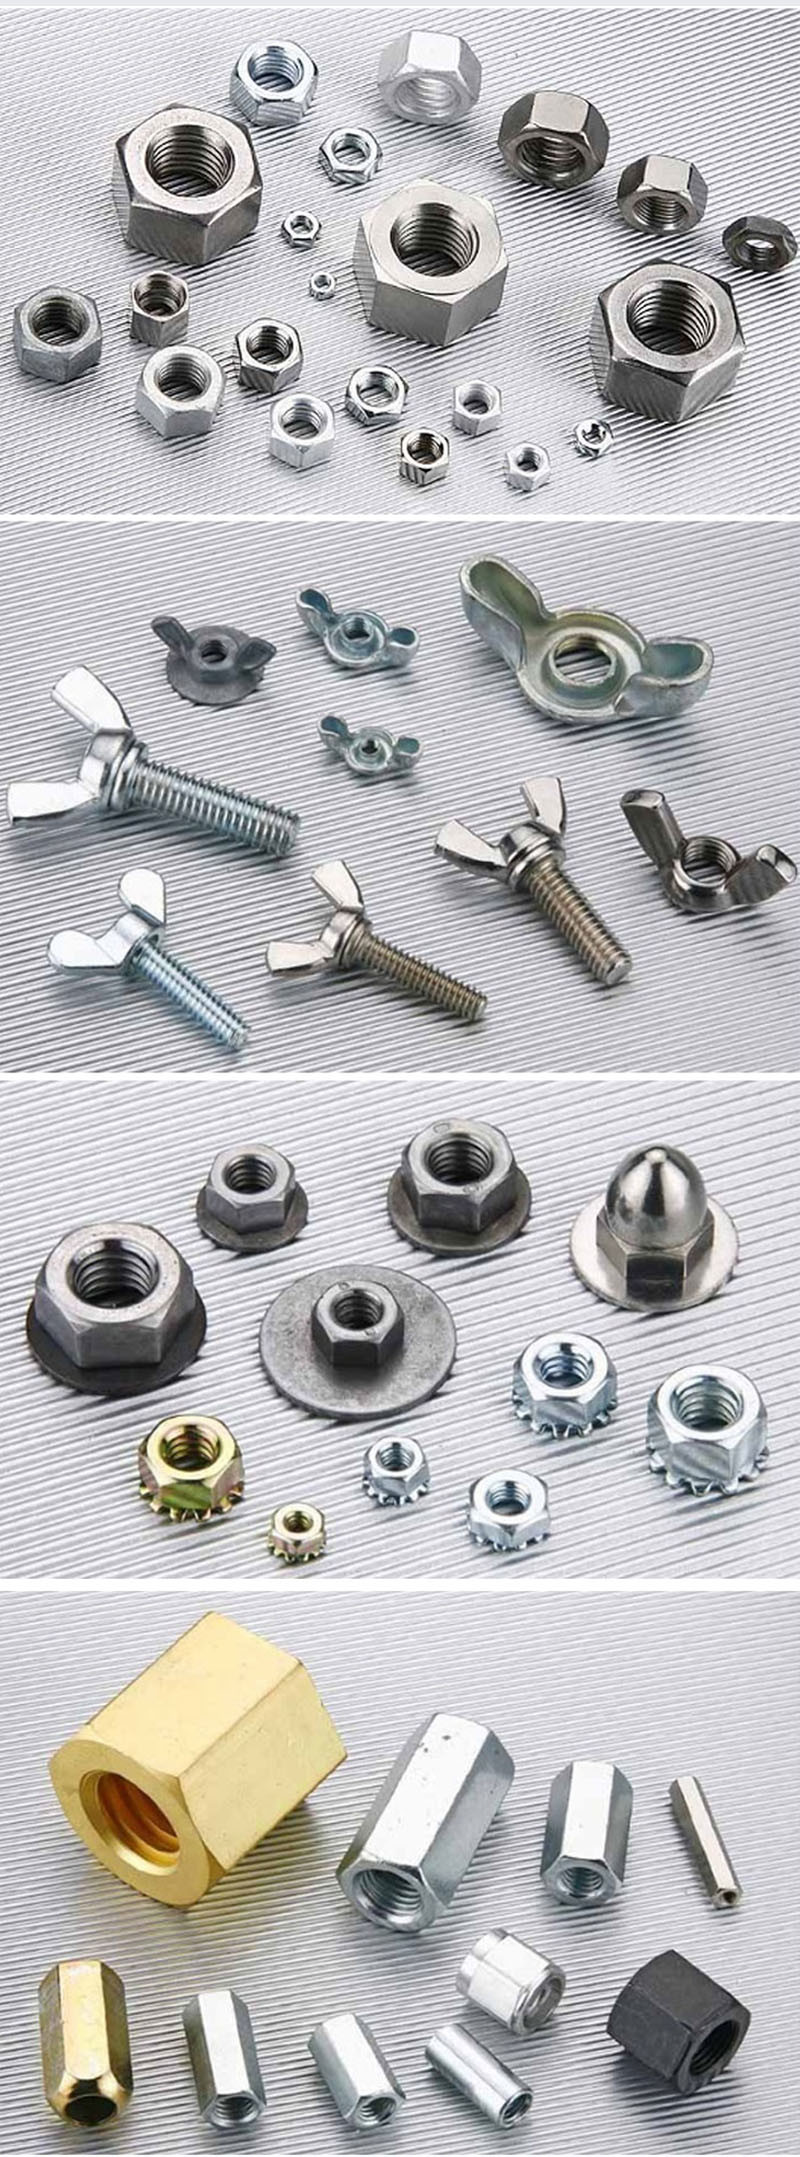 Hex Bolt with Nut and Washer